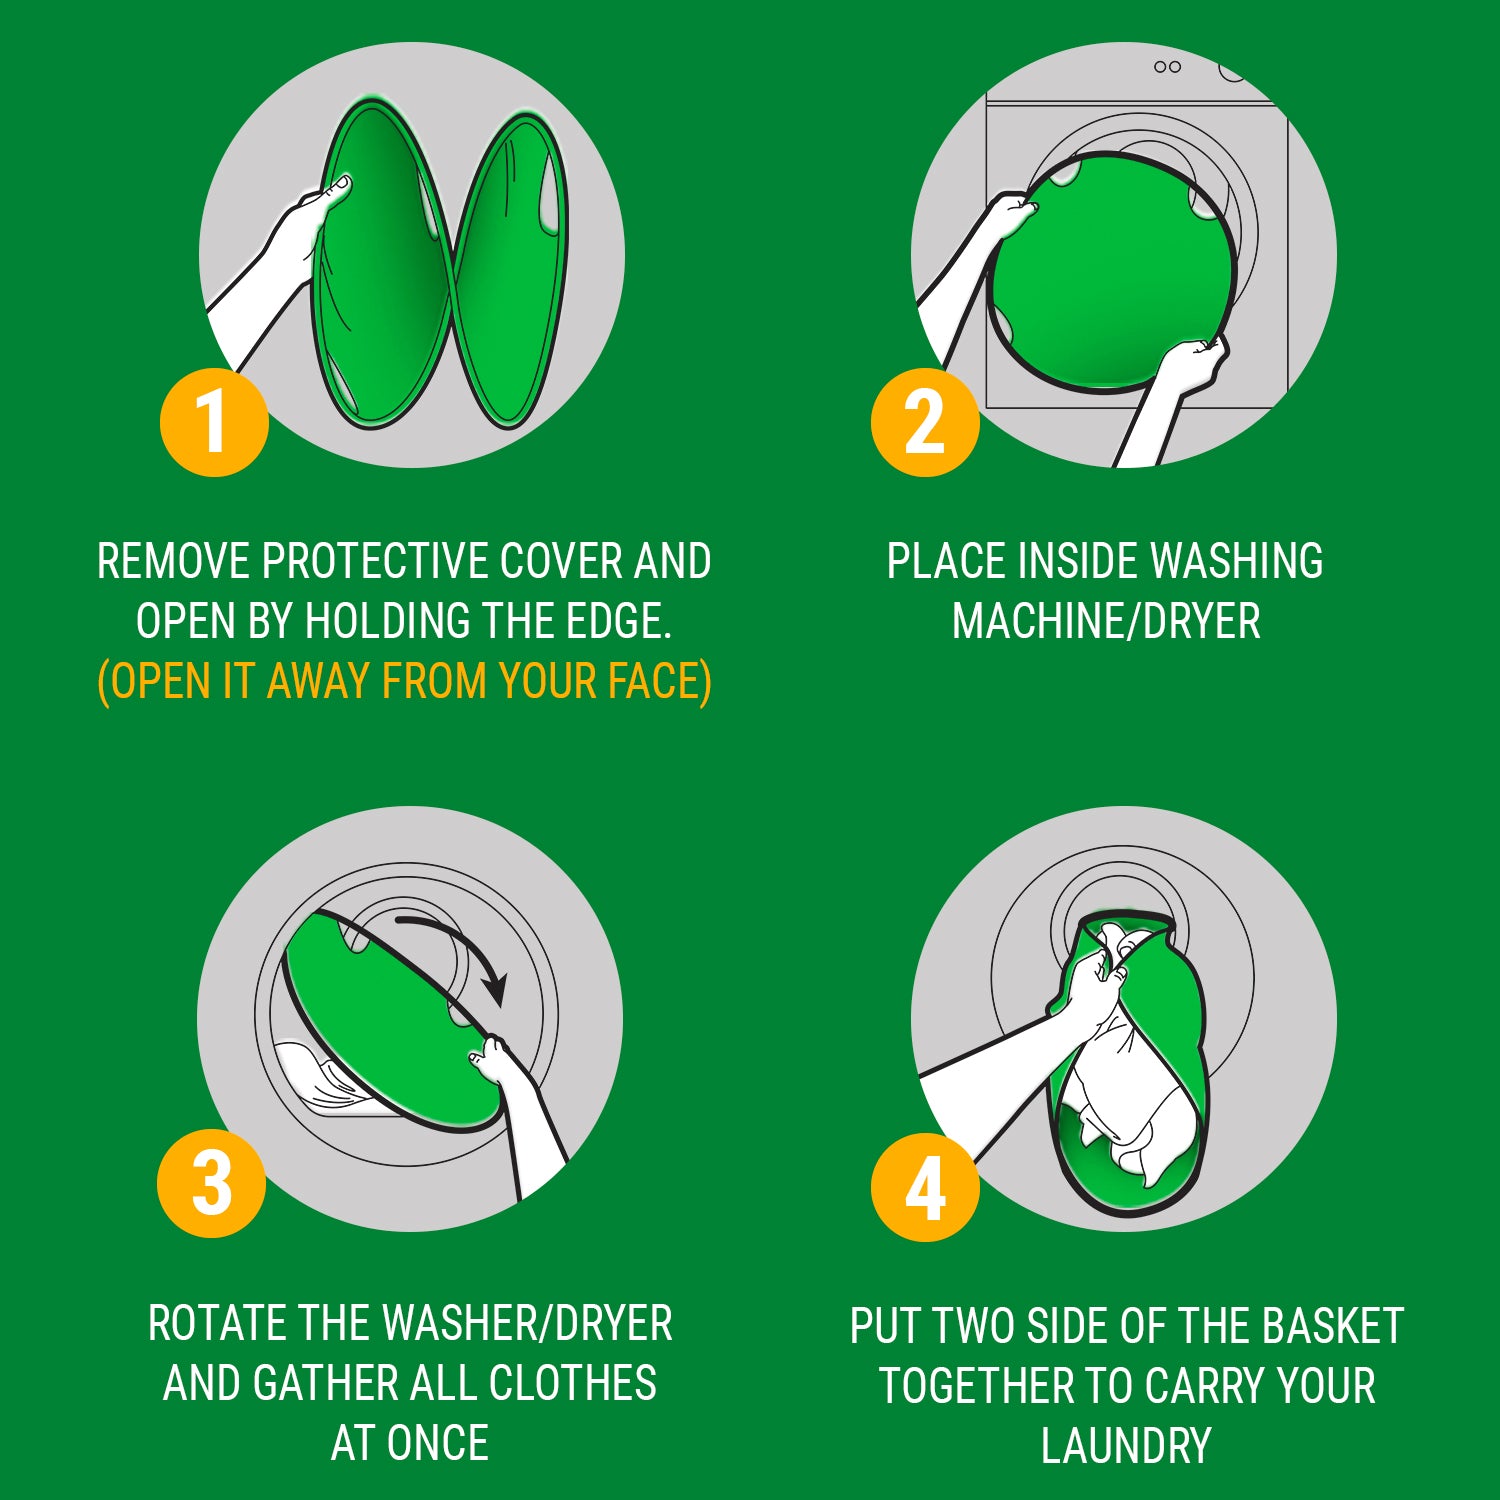 The 4 steps on how to use it and your LaundryTurtle.